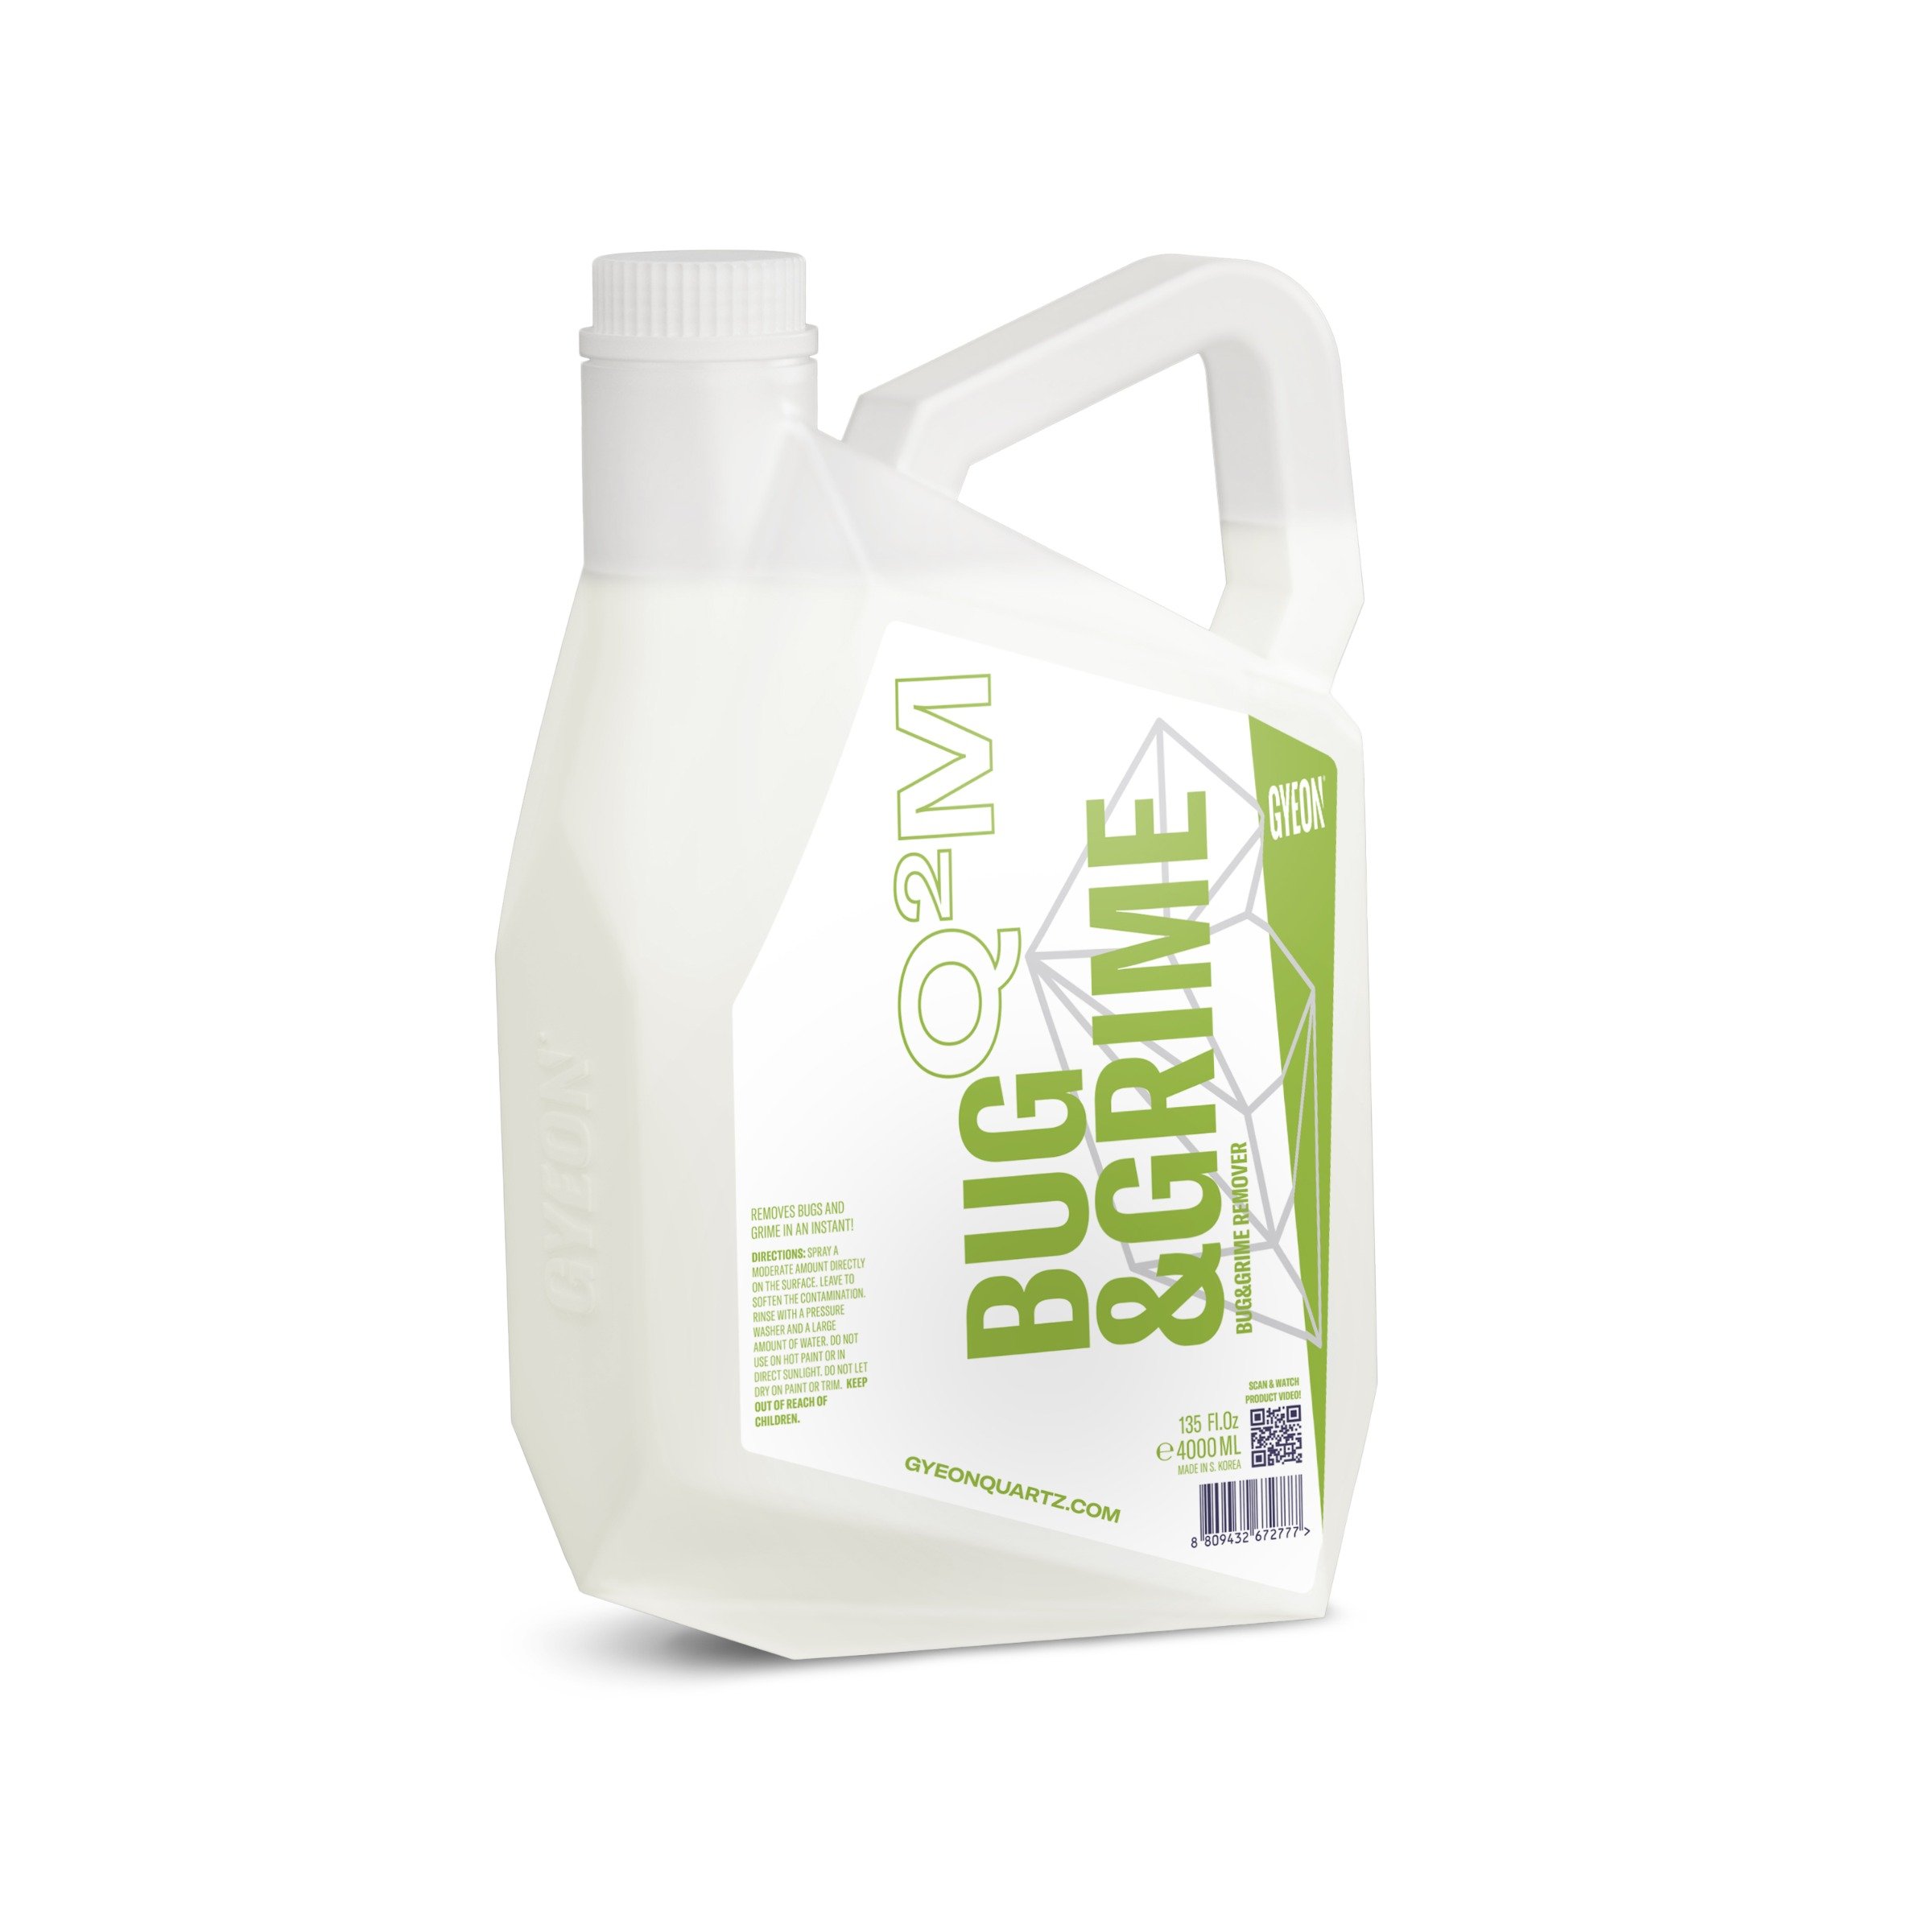 Q²M Bug and Grime - 4000 ml